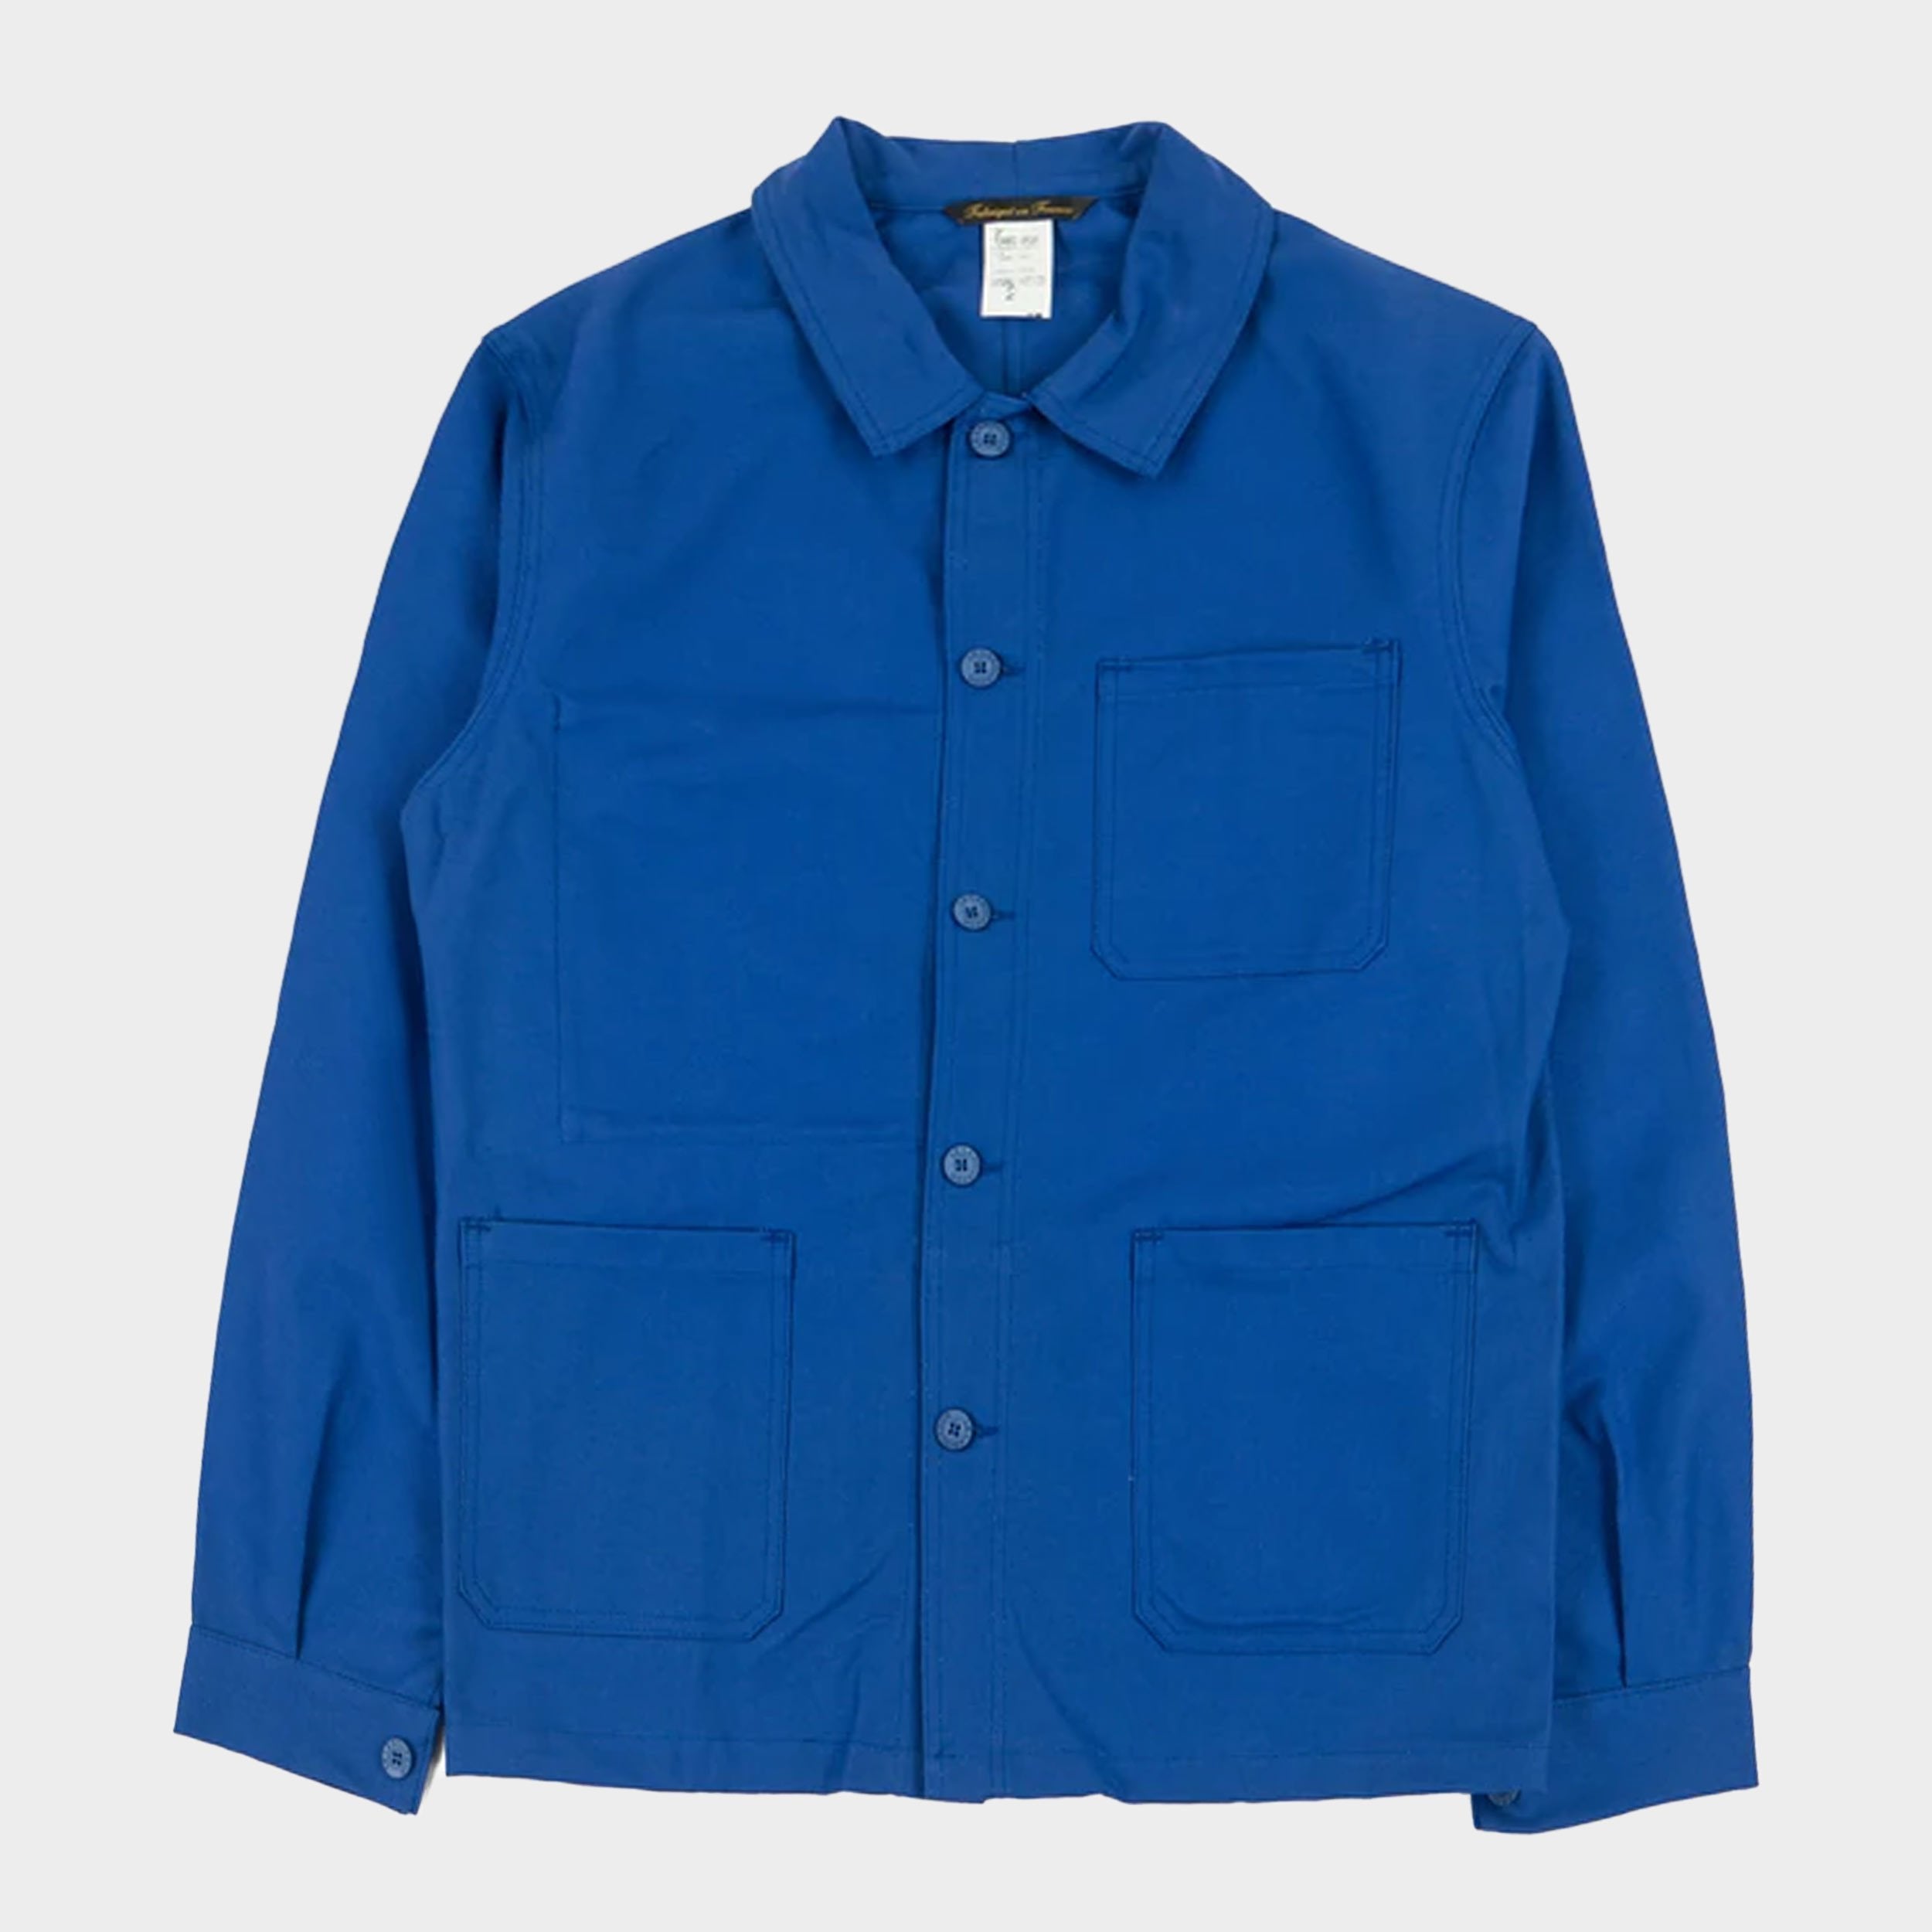 Le Laboureur French Cotton Work Jacket in French Blue